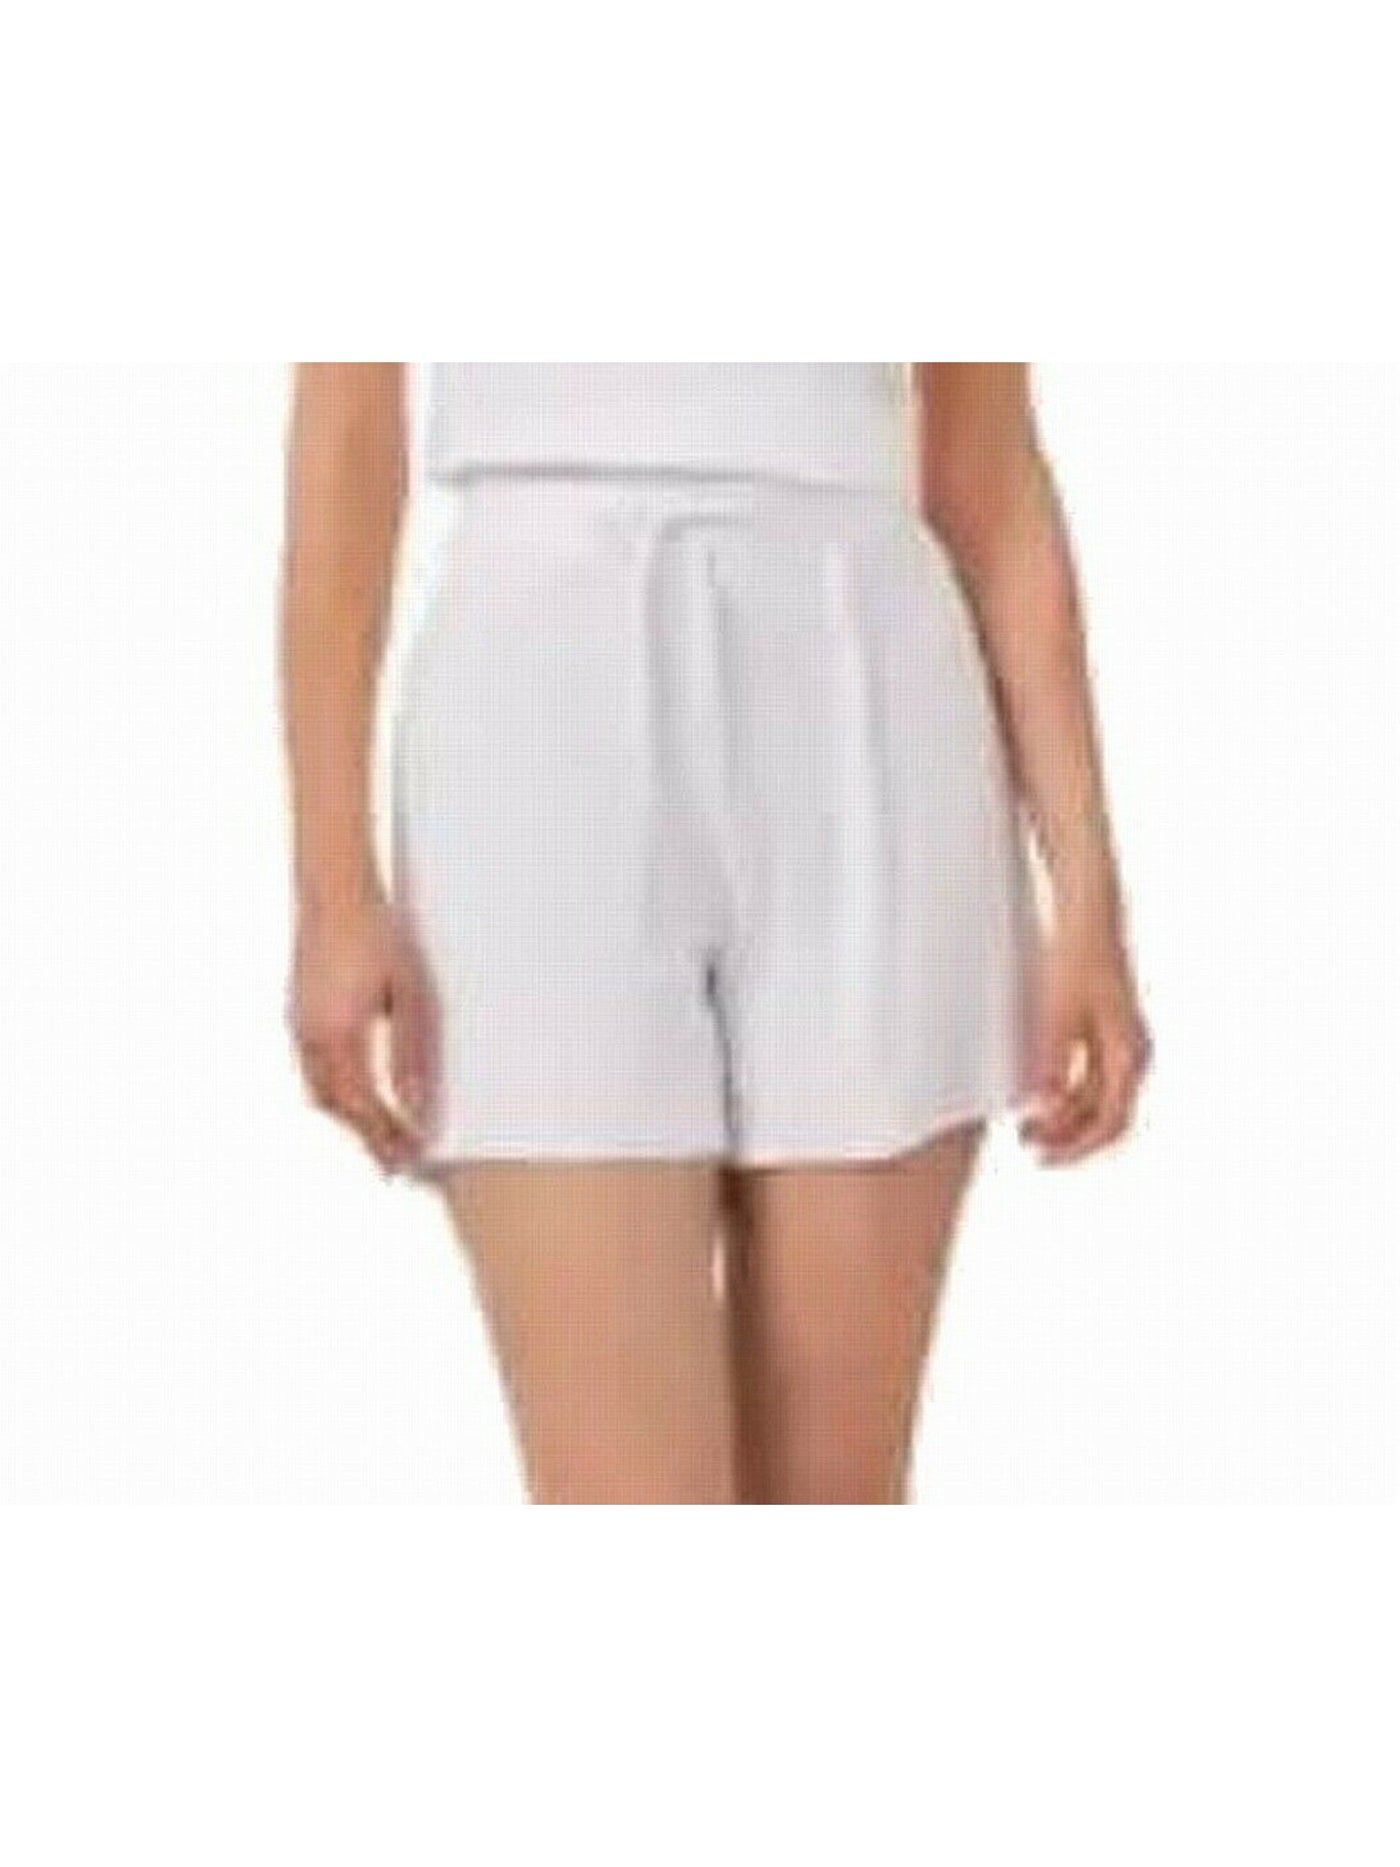 RILEY&RAE Womens White Pocketed Tie Two Front Pockets,  Relaxed Fit. Shorts XXL